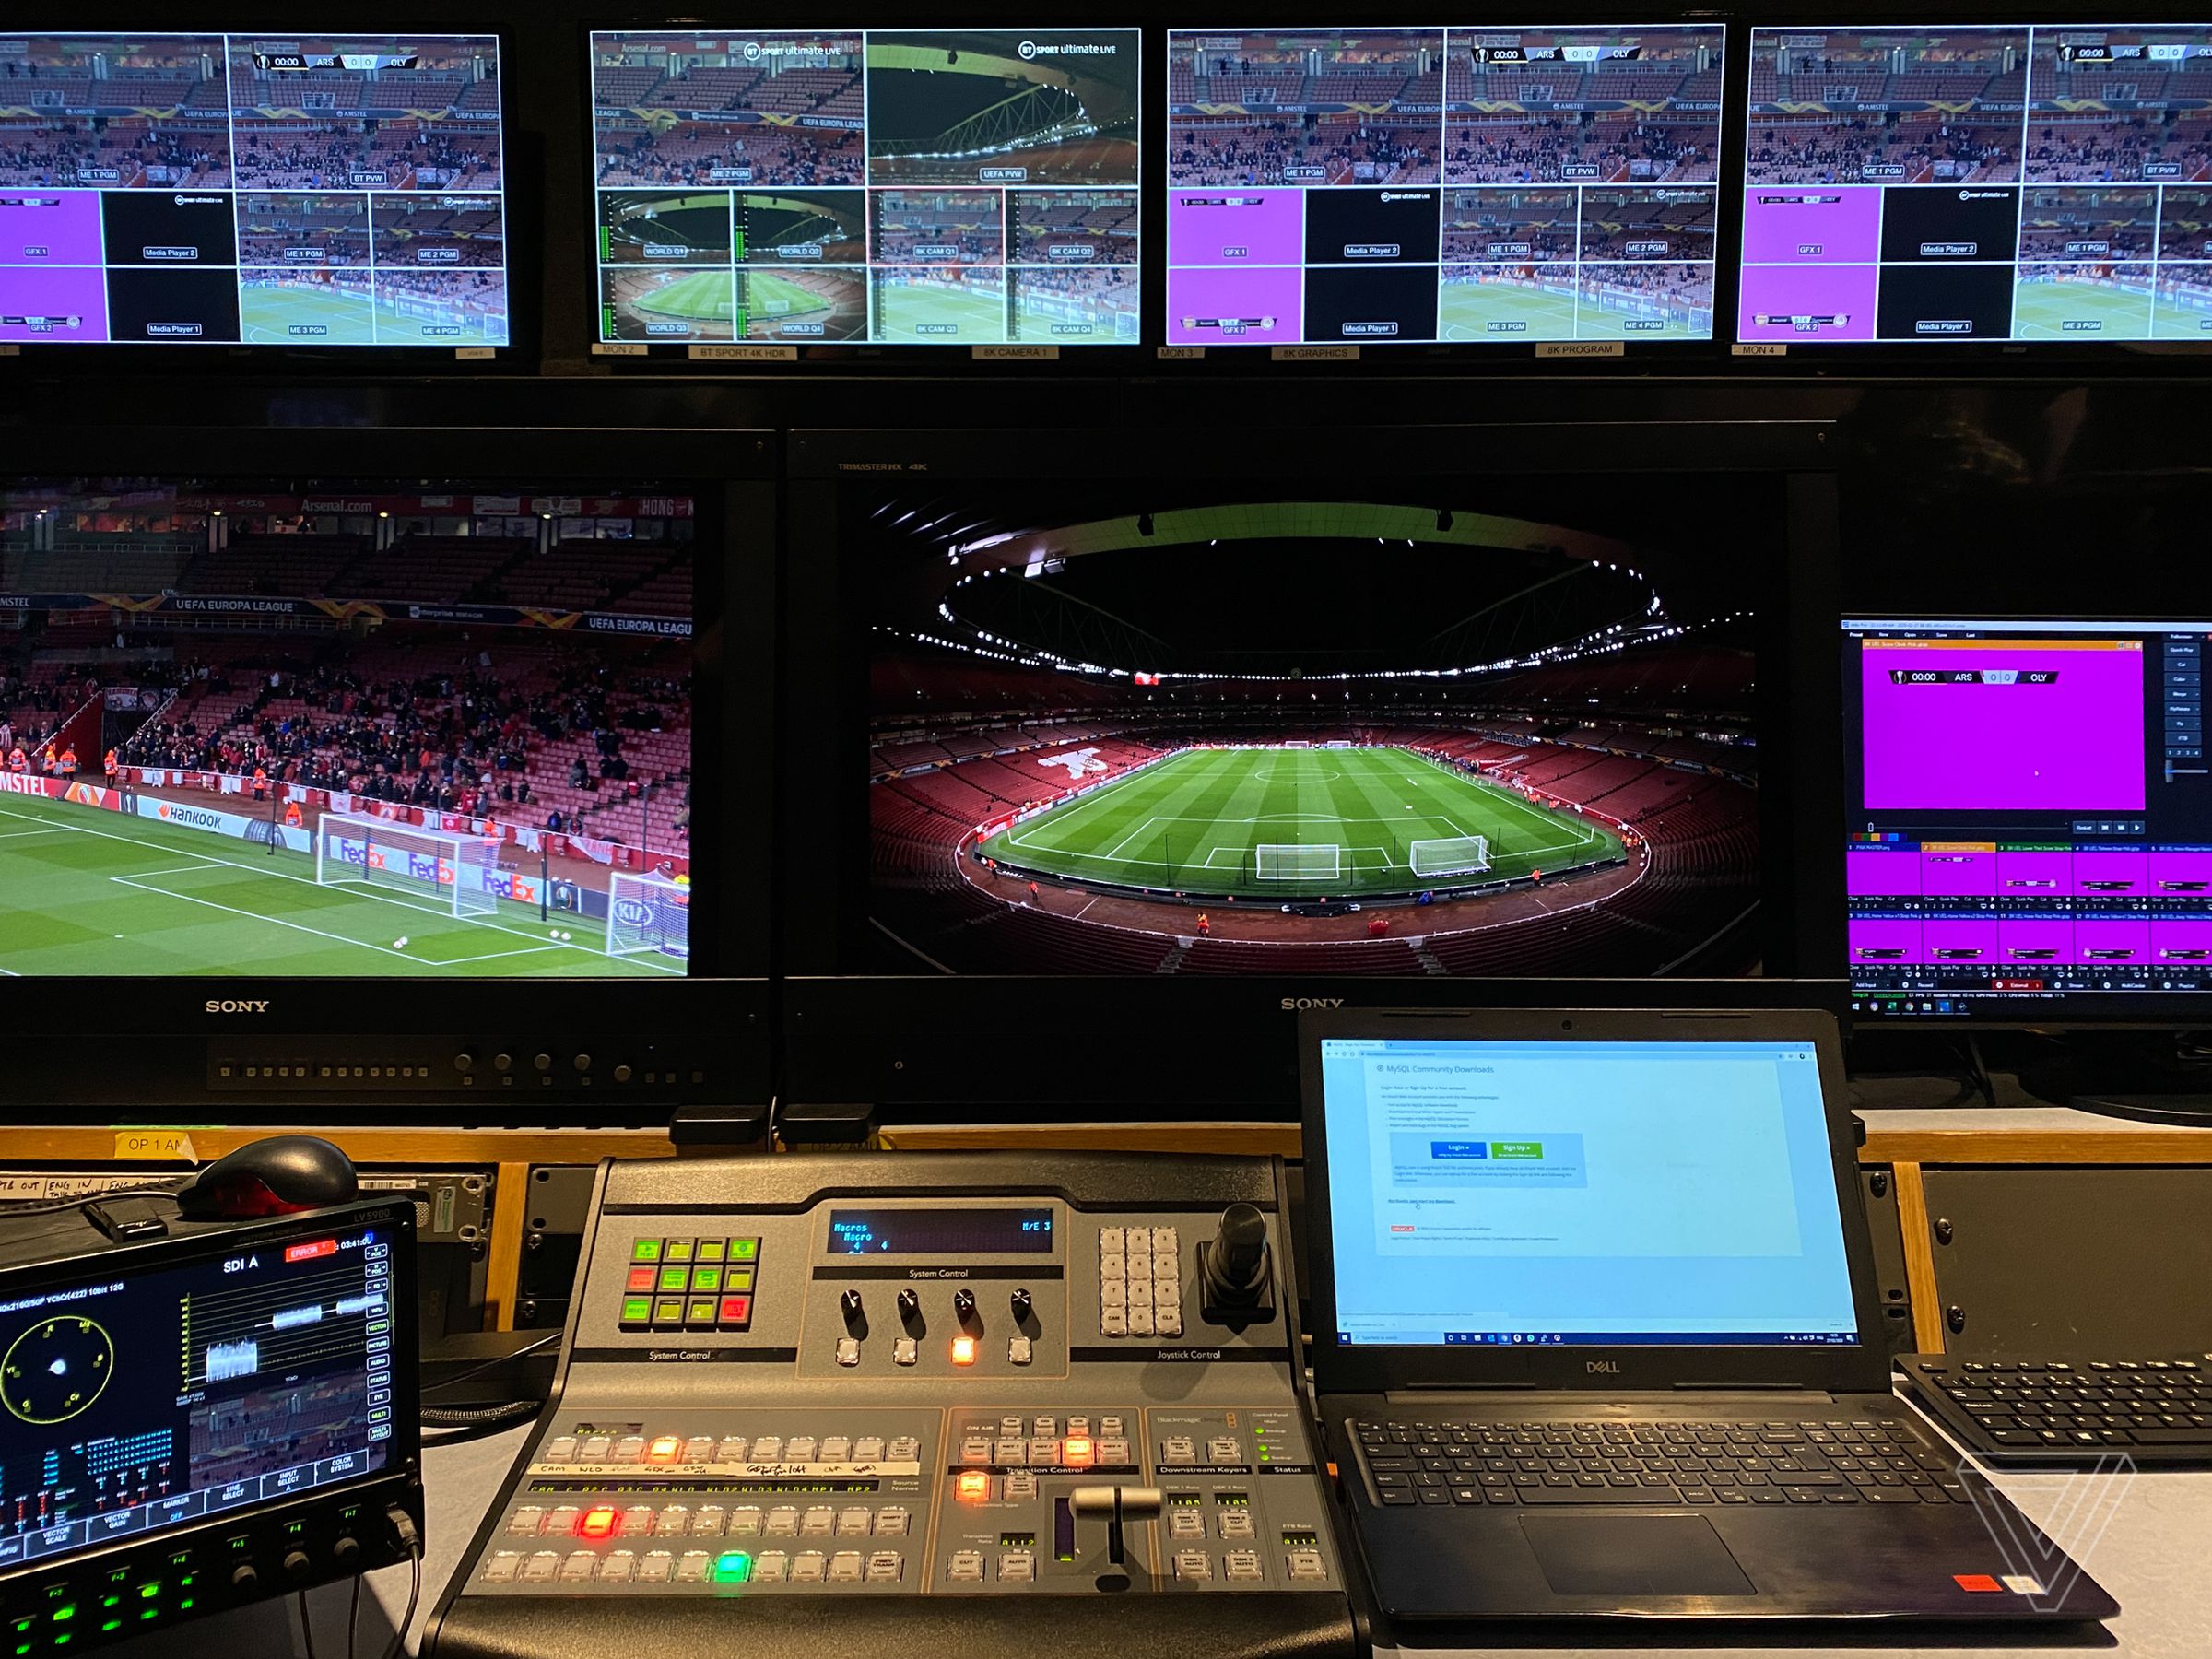 Behind the scenes of BT Sport’s 8K HDR stream.